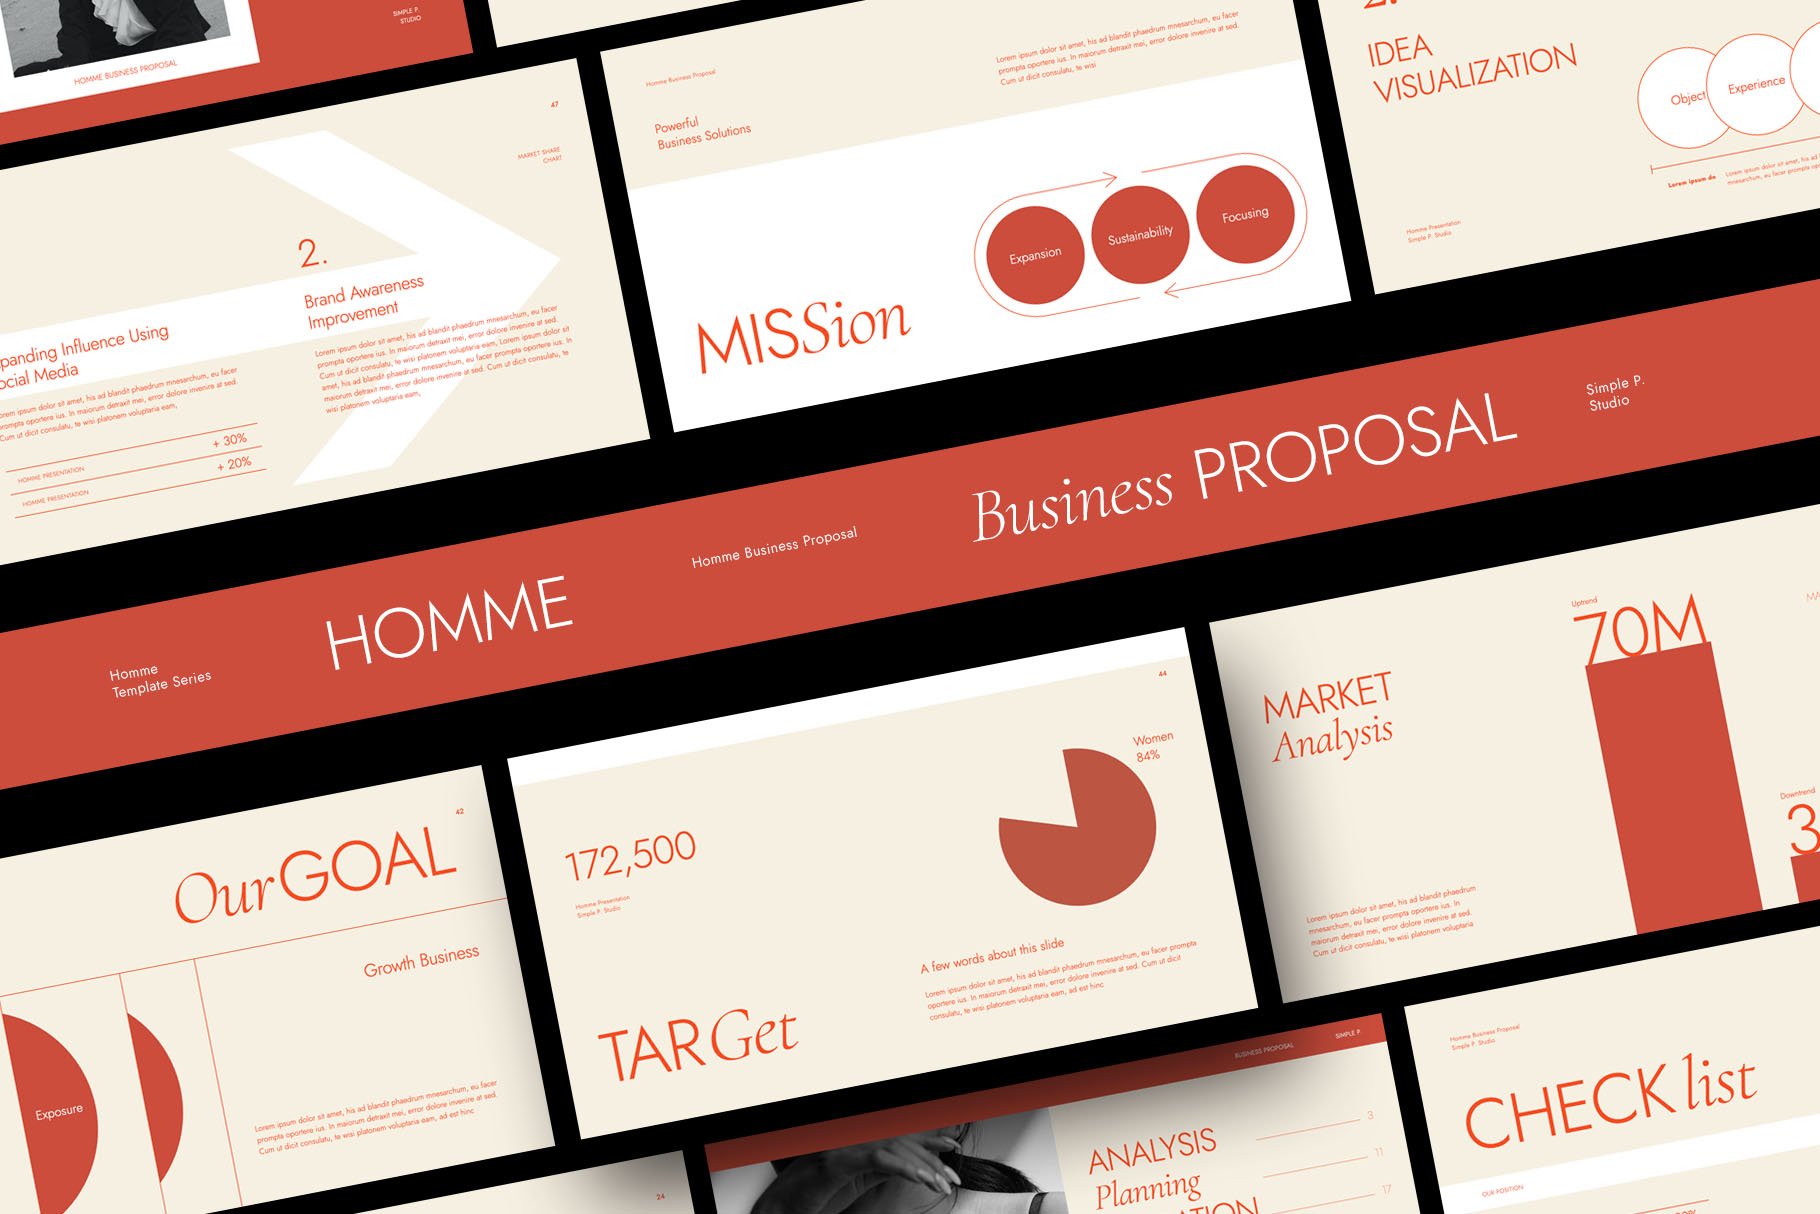 HOMME Business Proposal cover image.